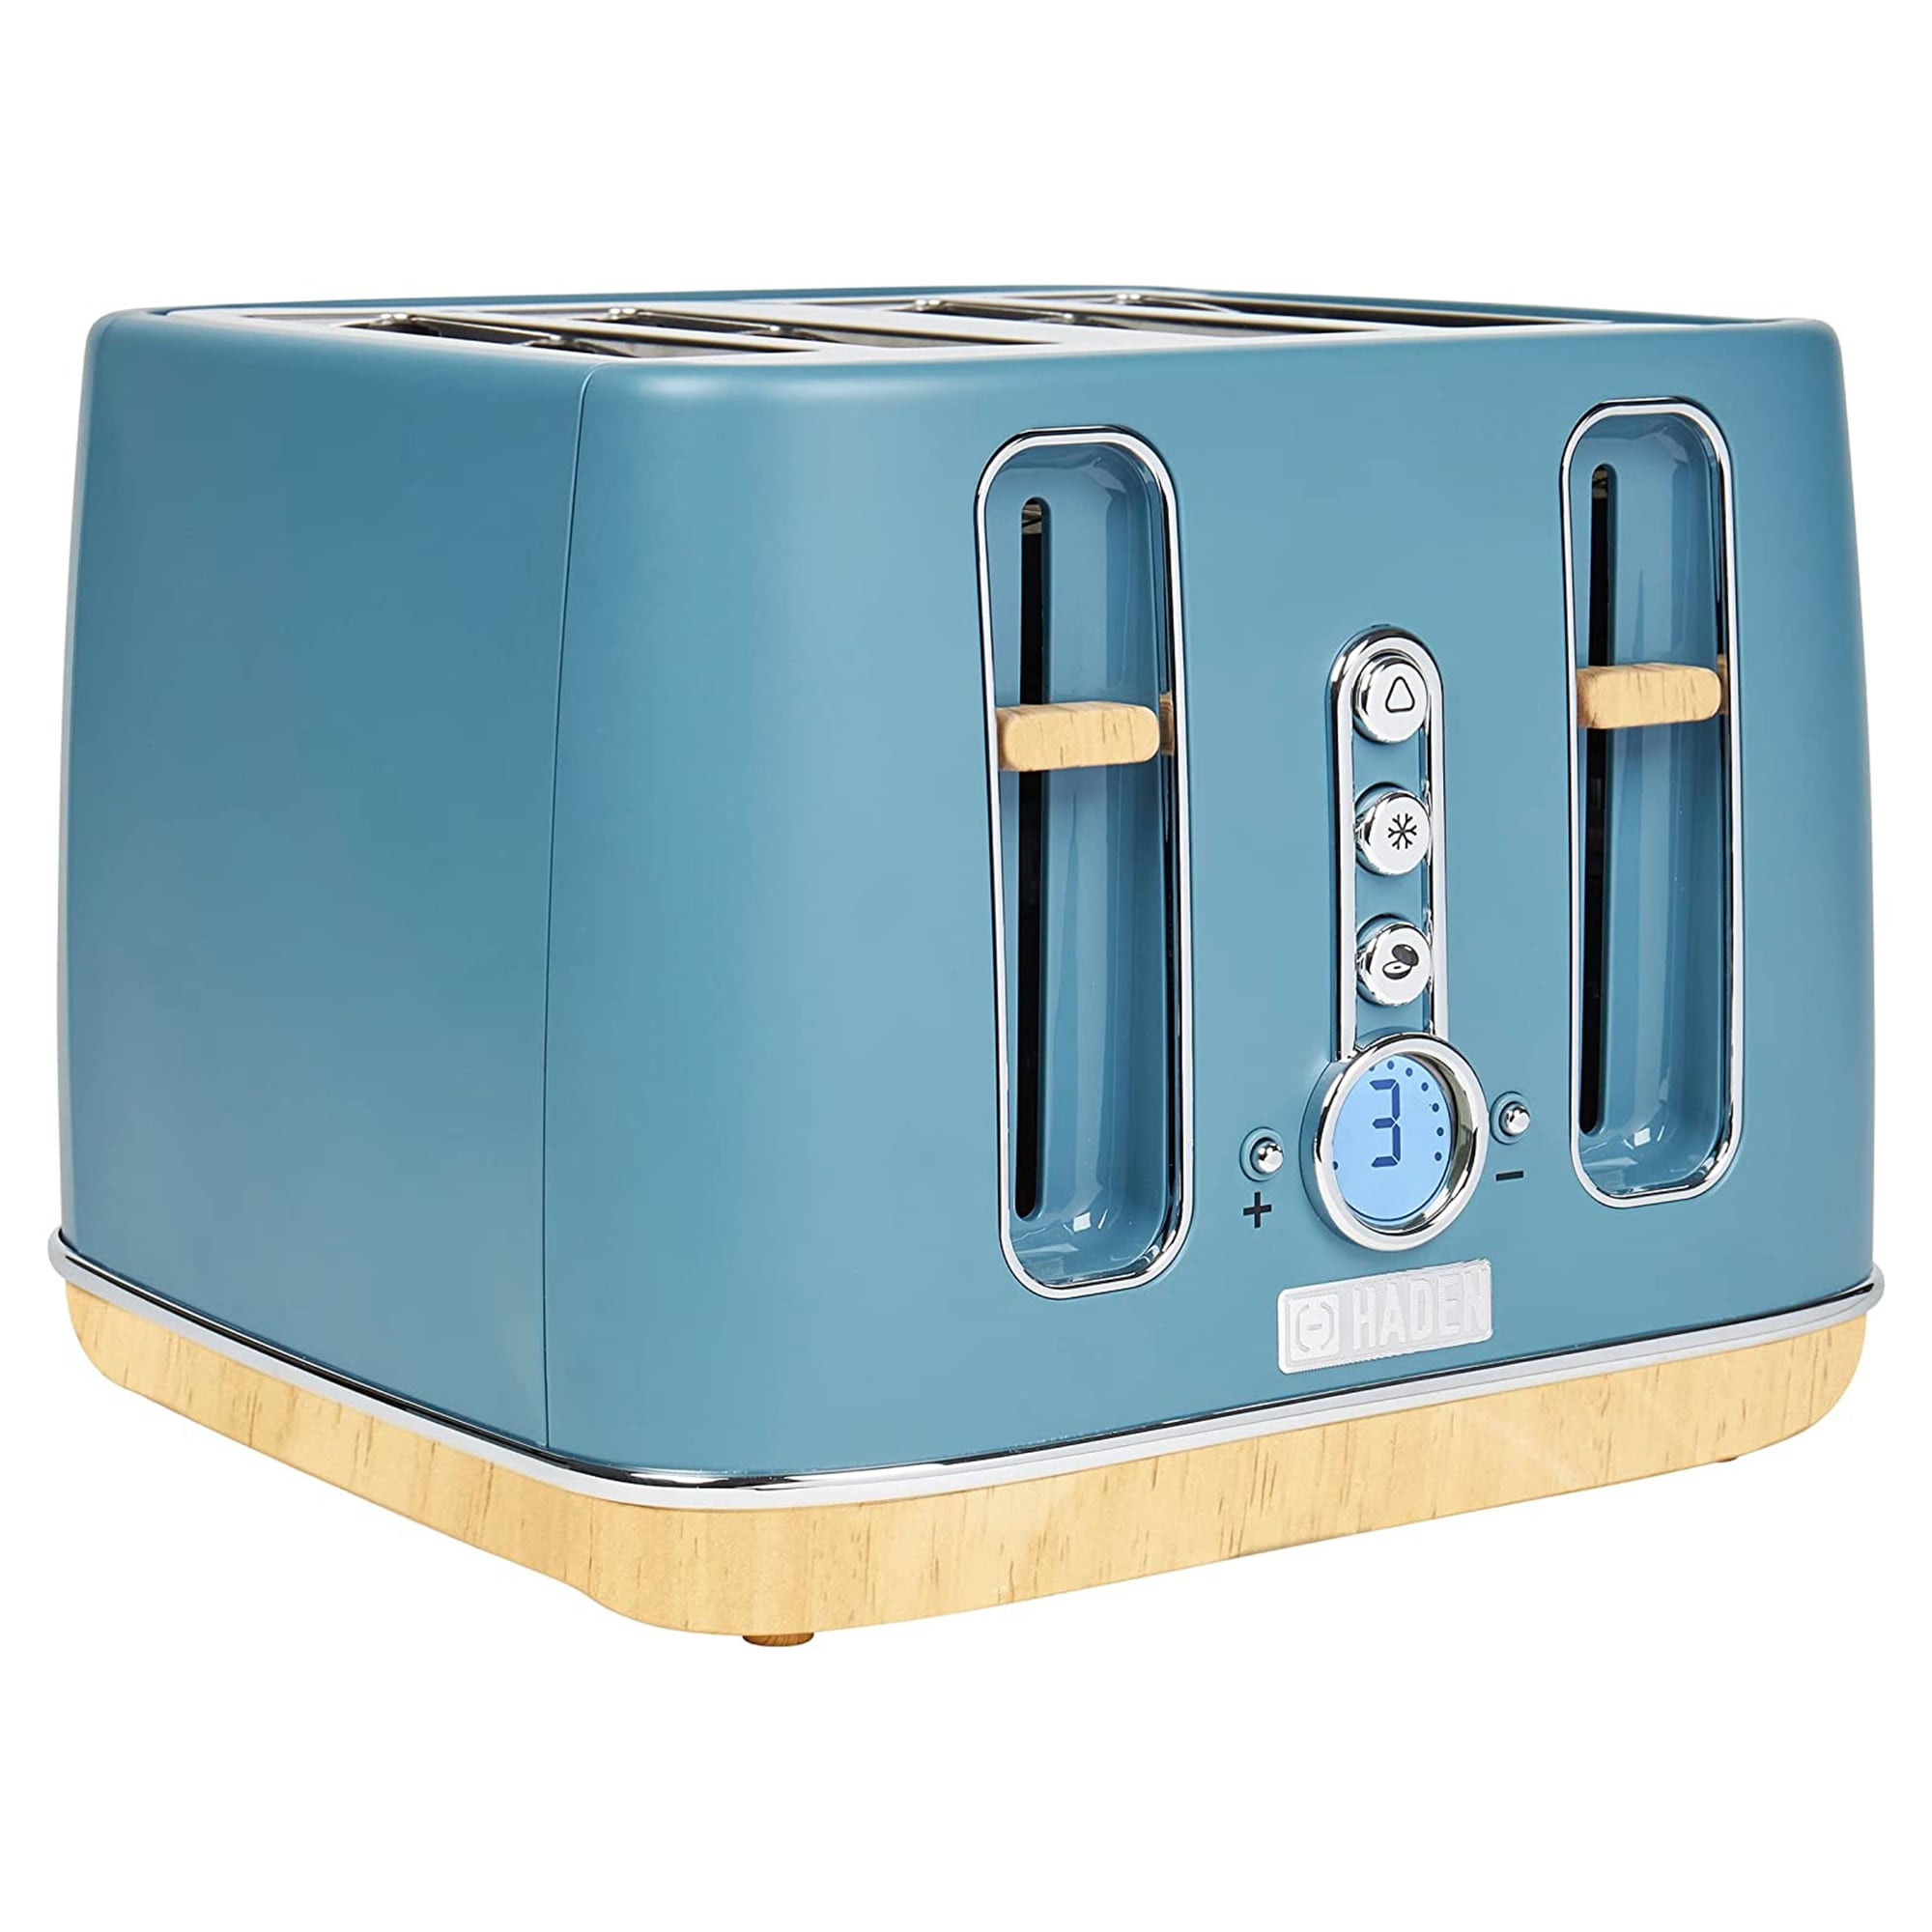 https://ak1.ostkcdn.com/images/products/is/images/direct/09365fe8b61926ae94c36649c2453bfaedd3097c/Haden-Dorchester-4-Slice-Wide-Slot-Retro-Toaster-with-Control-Knob%2C-Stone-Blue.jpg